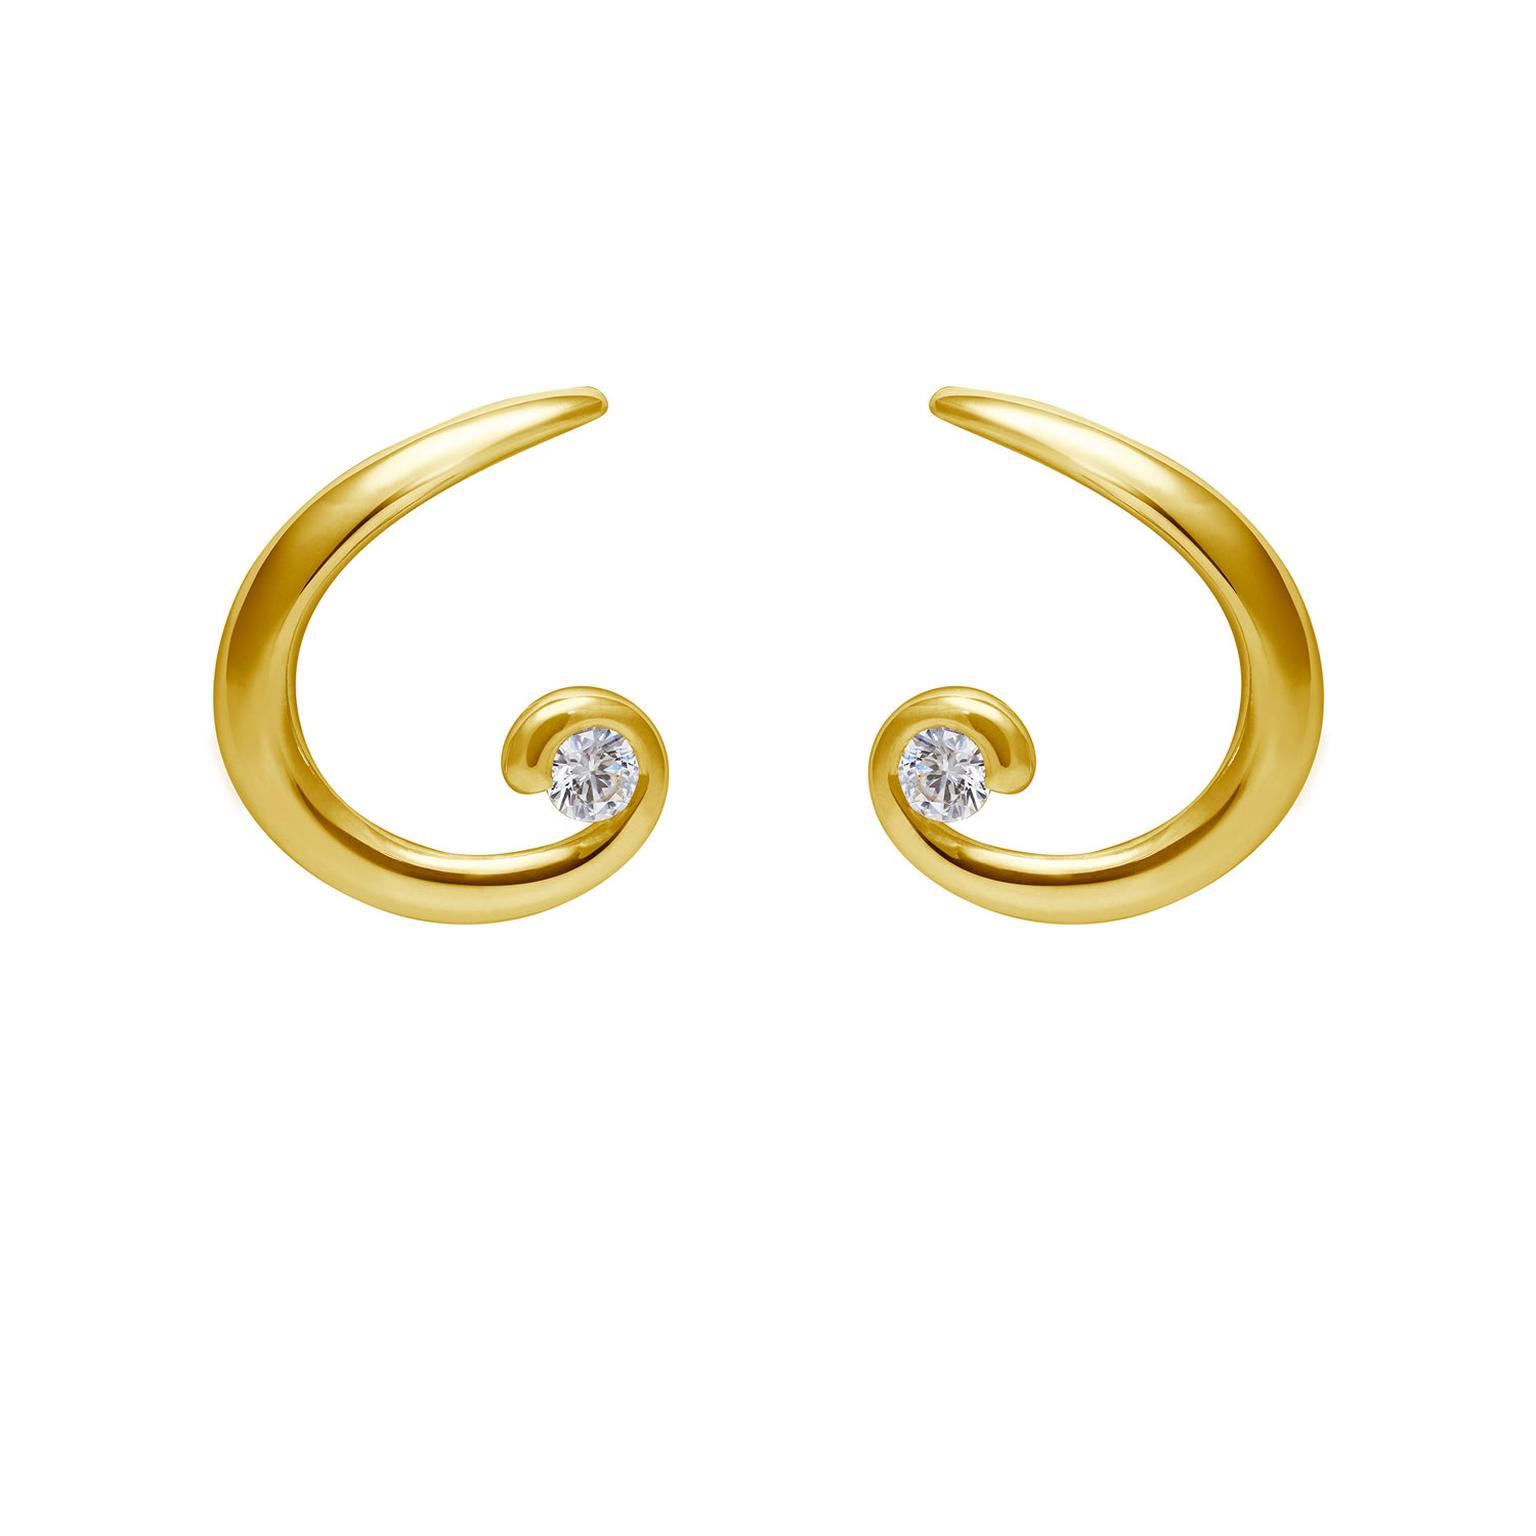 Arctic Circle gold earrings with Canadian diamonds